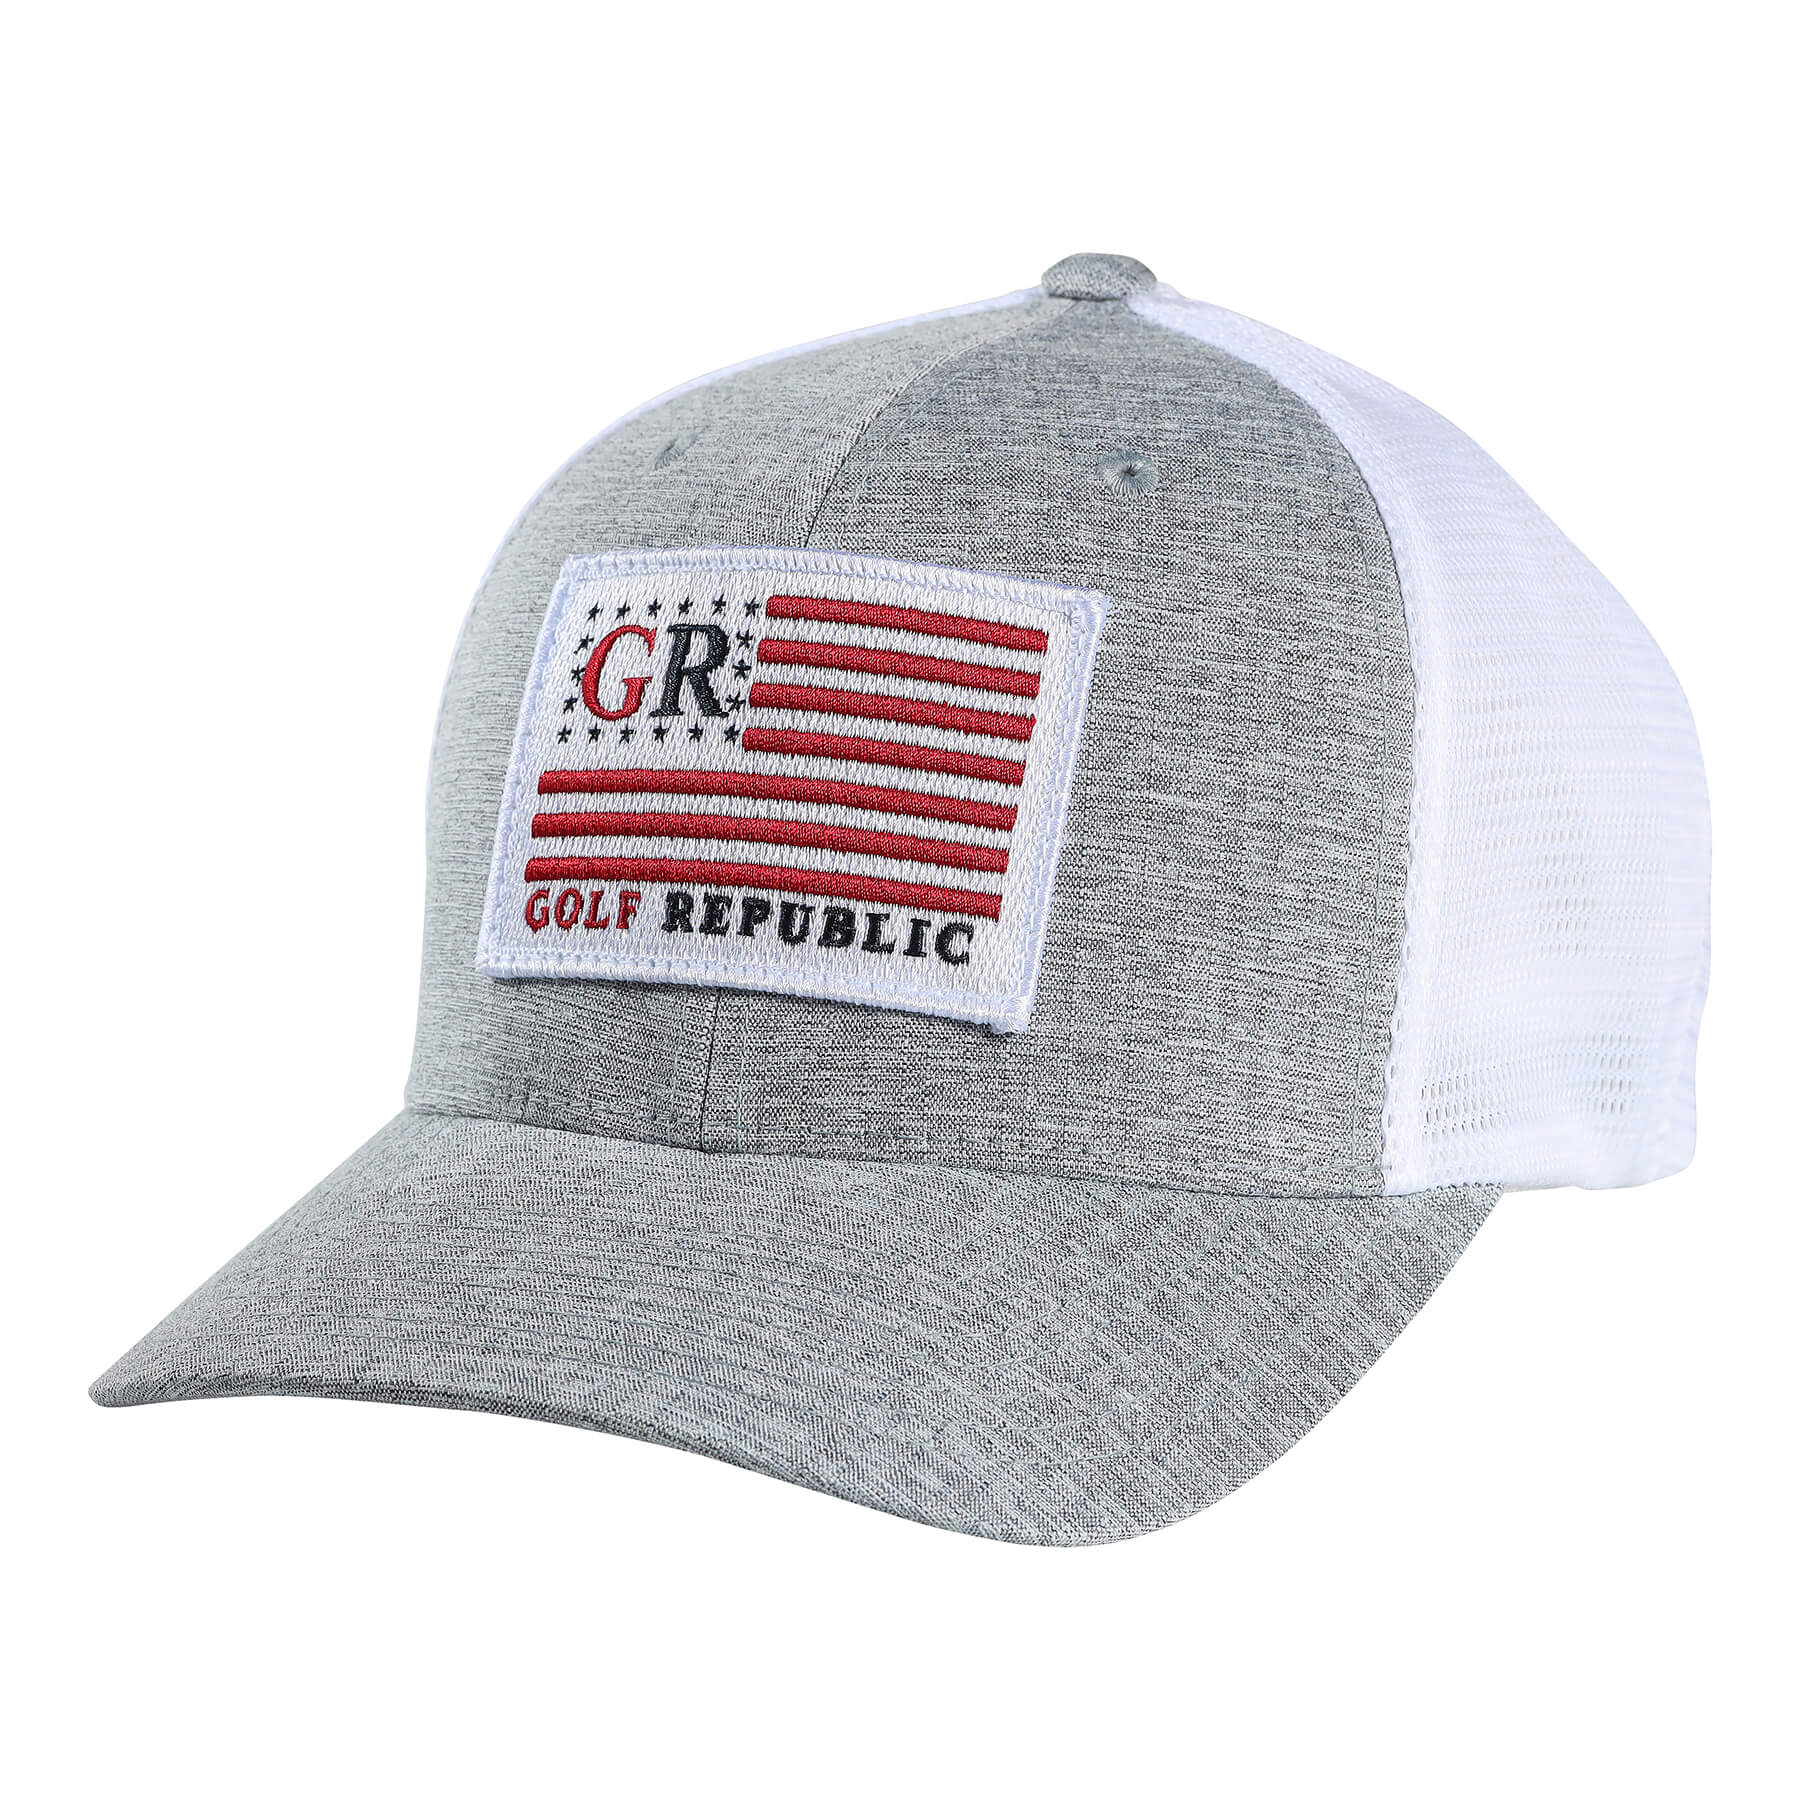 Patch Hats Grey/White Trucker Flag Embroidered | FlexFit